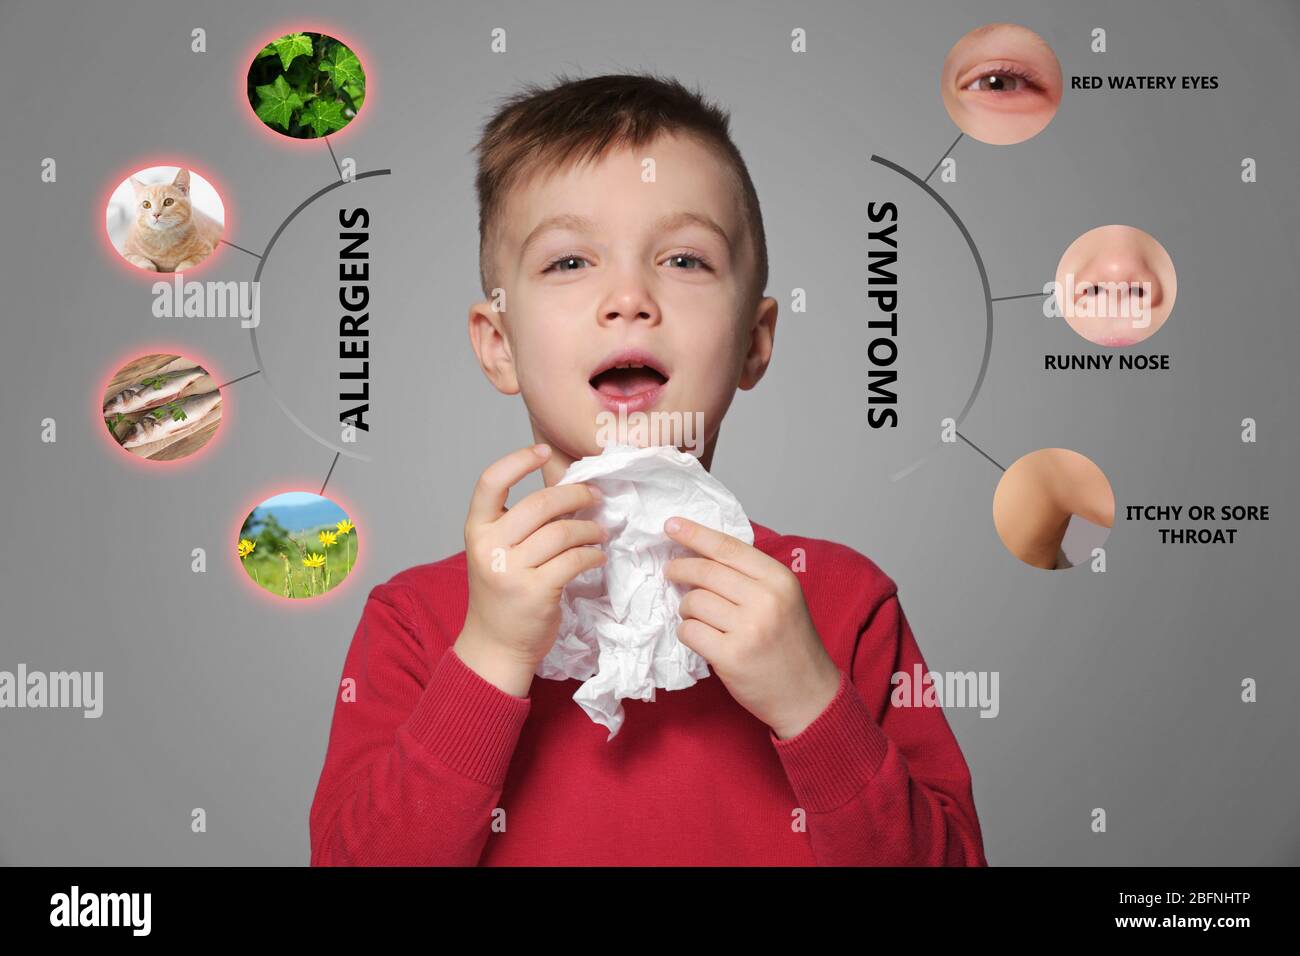 Sick little boy and list of allergies symptoms and causes on grey background Stock Photo